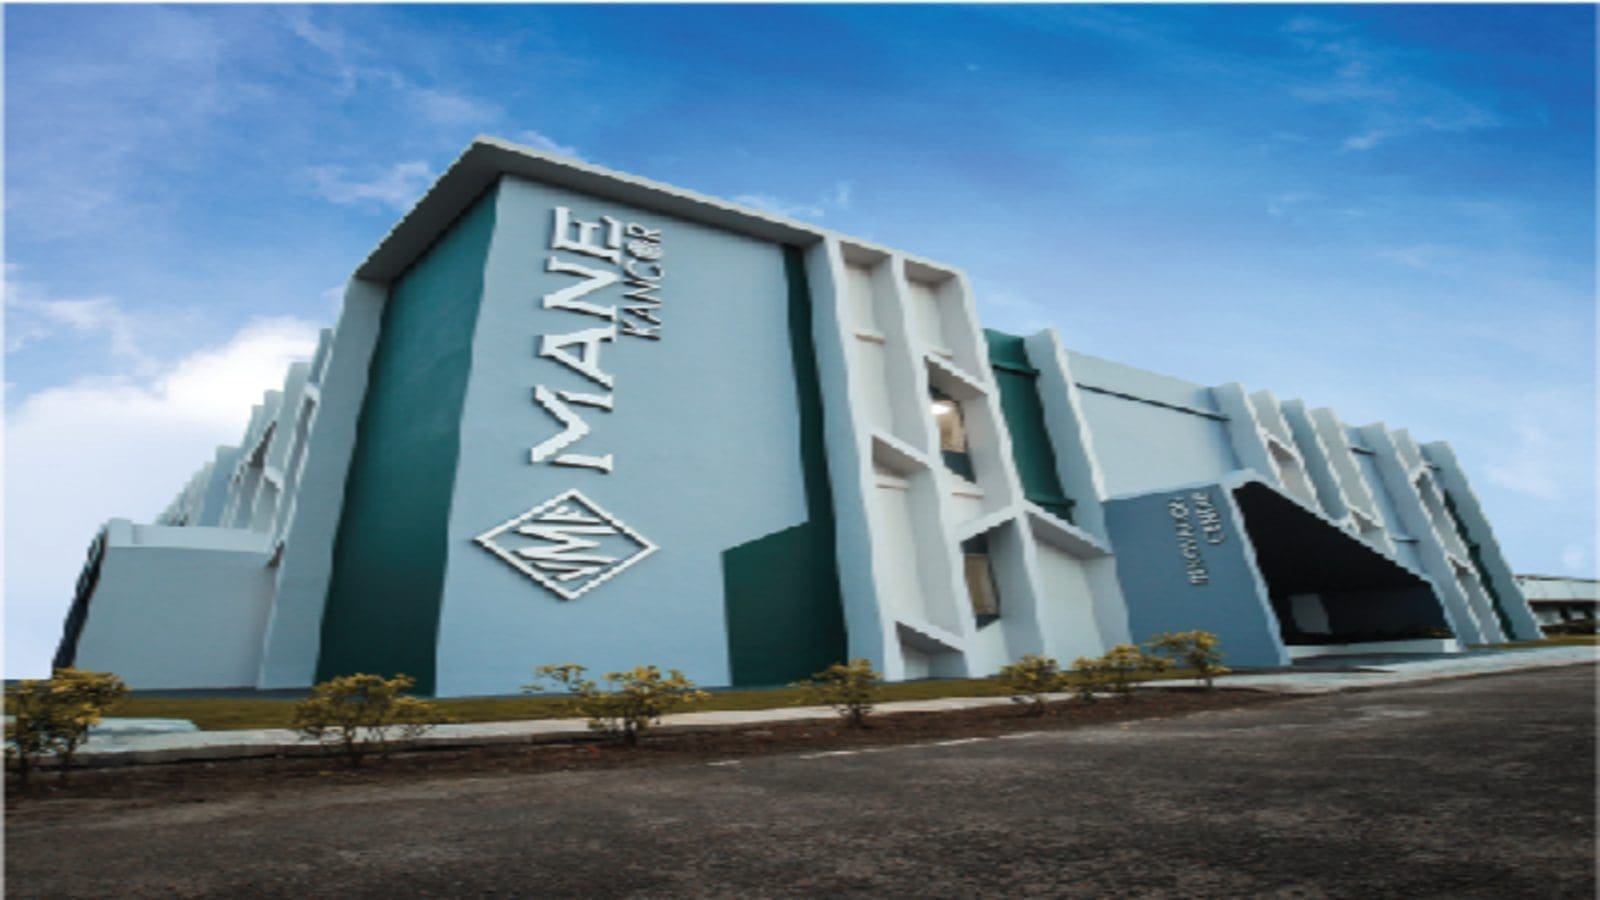 Mane Kancor expands R&D capabilities with launch of new Innovation center